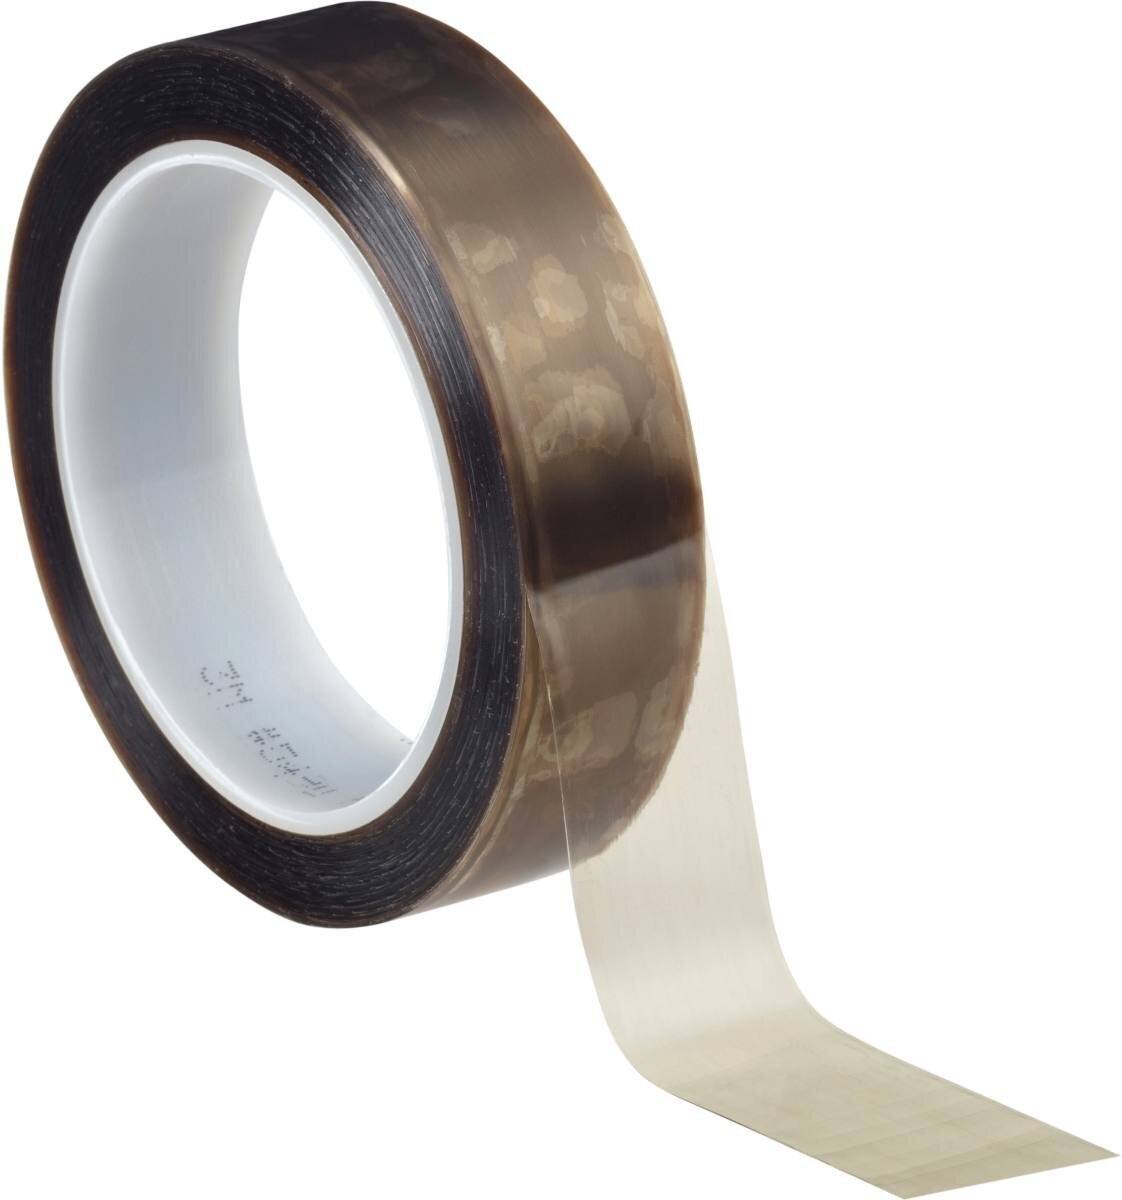 3M 5490 PTFE extruded film adhesive tape 355.6mmx33m, 0.09mm, silicone